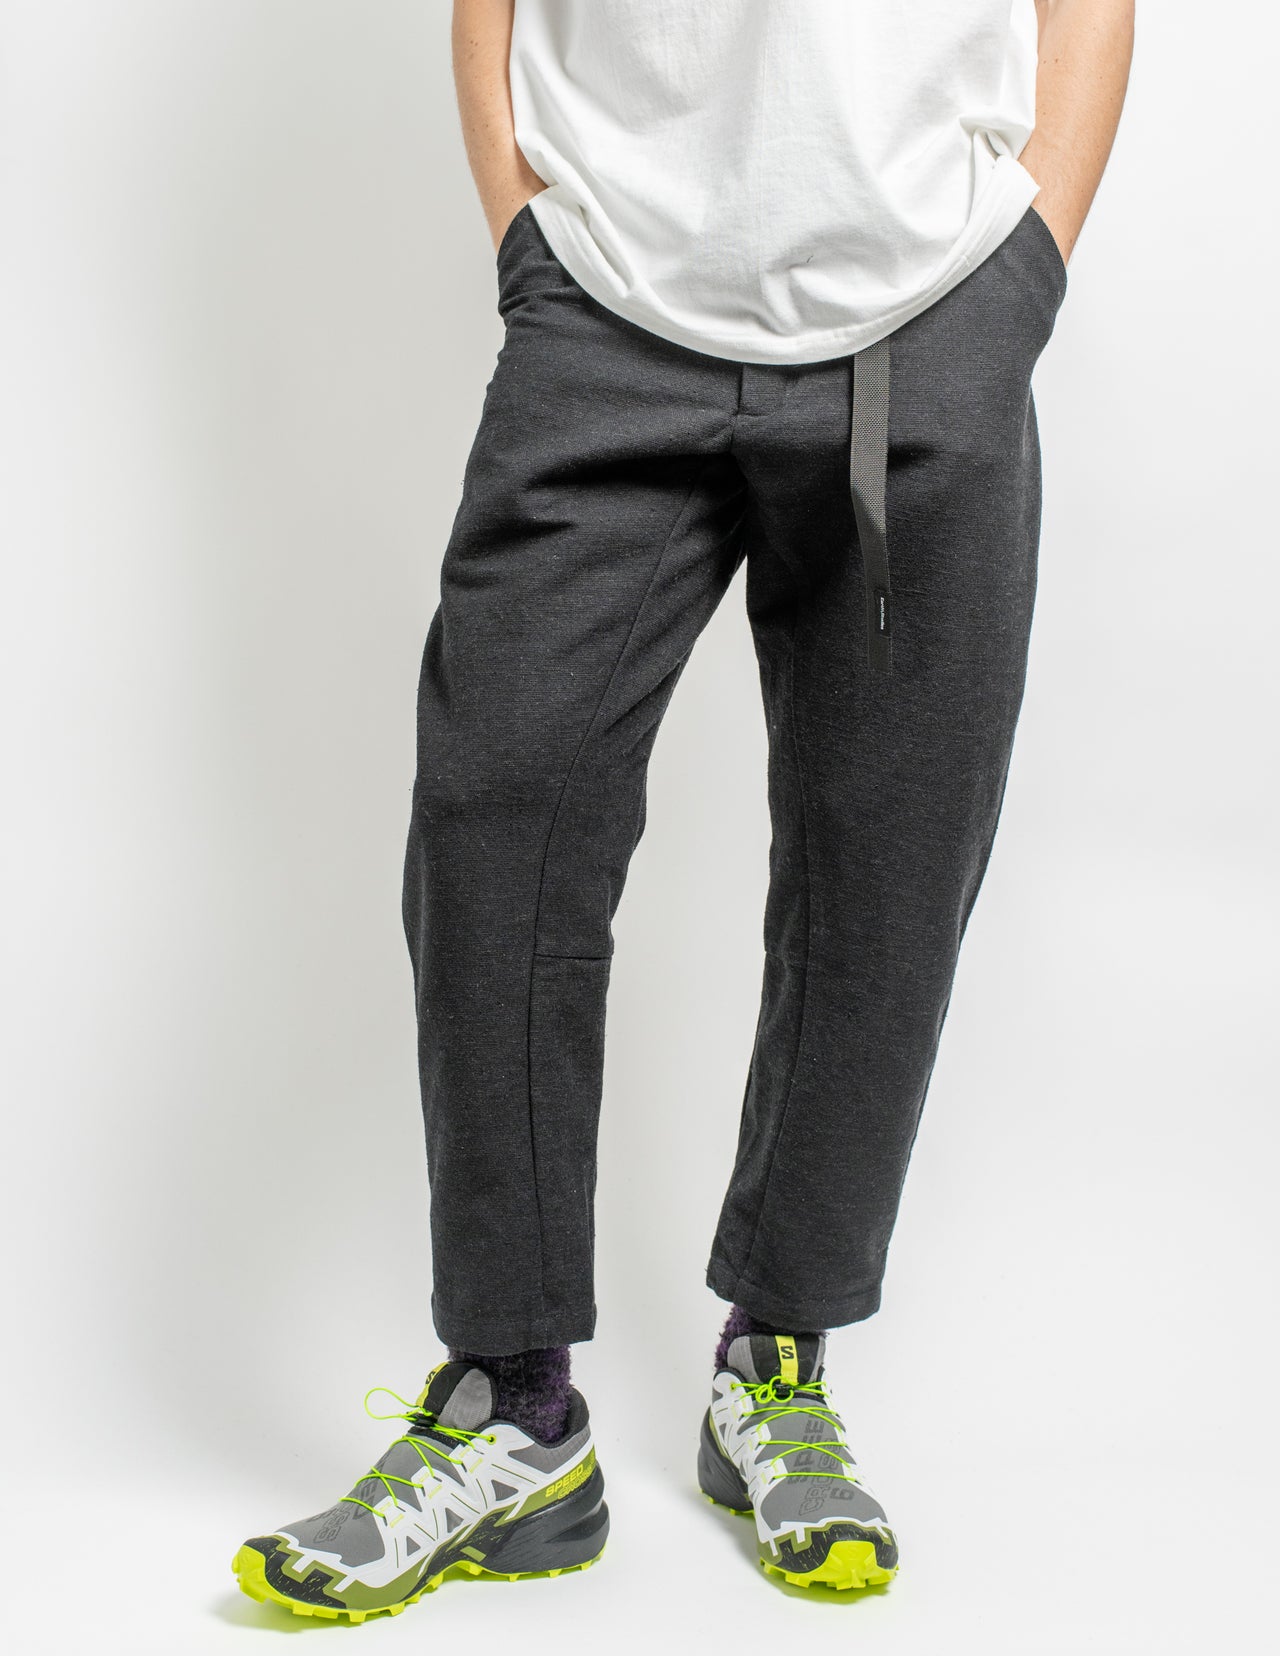 MP-102 Trail Pant in Charcoal